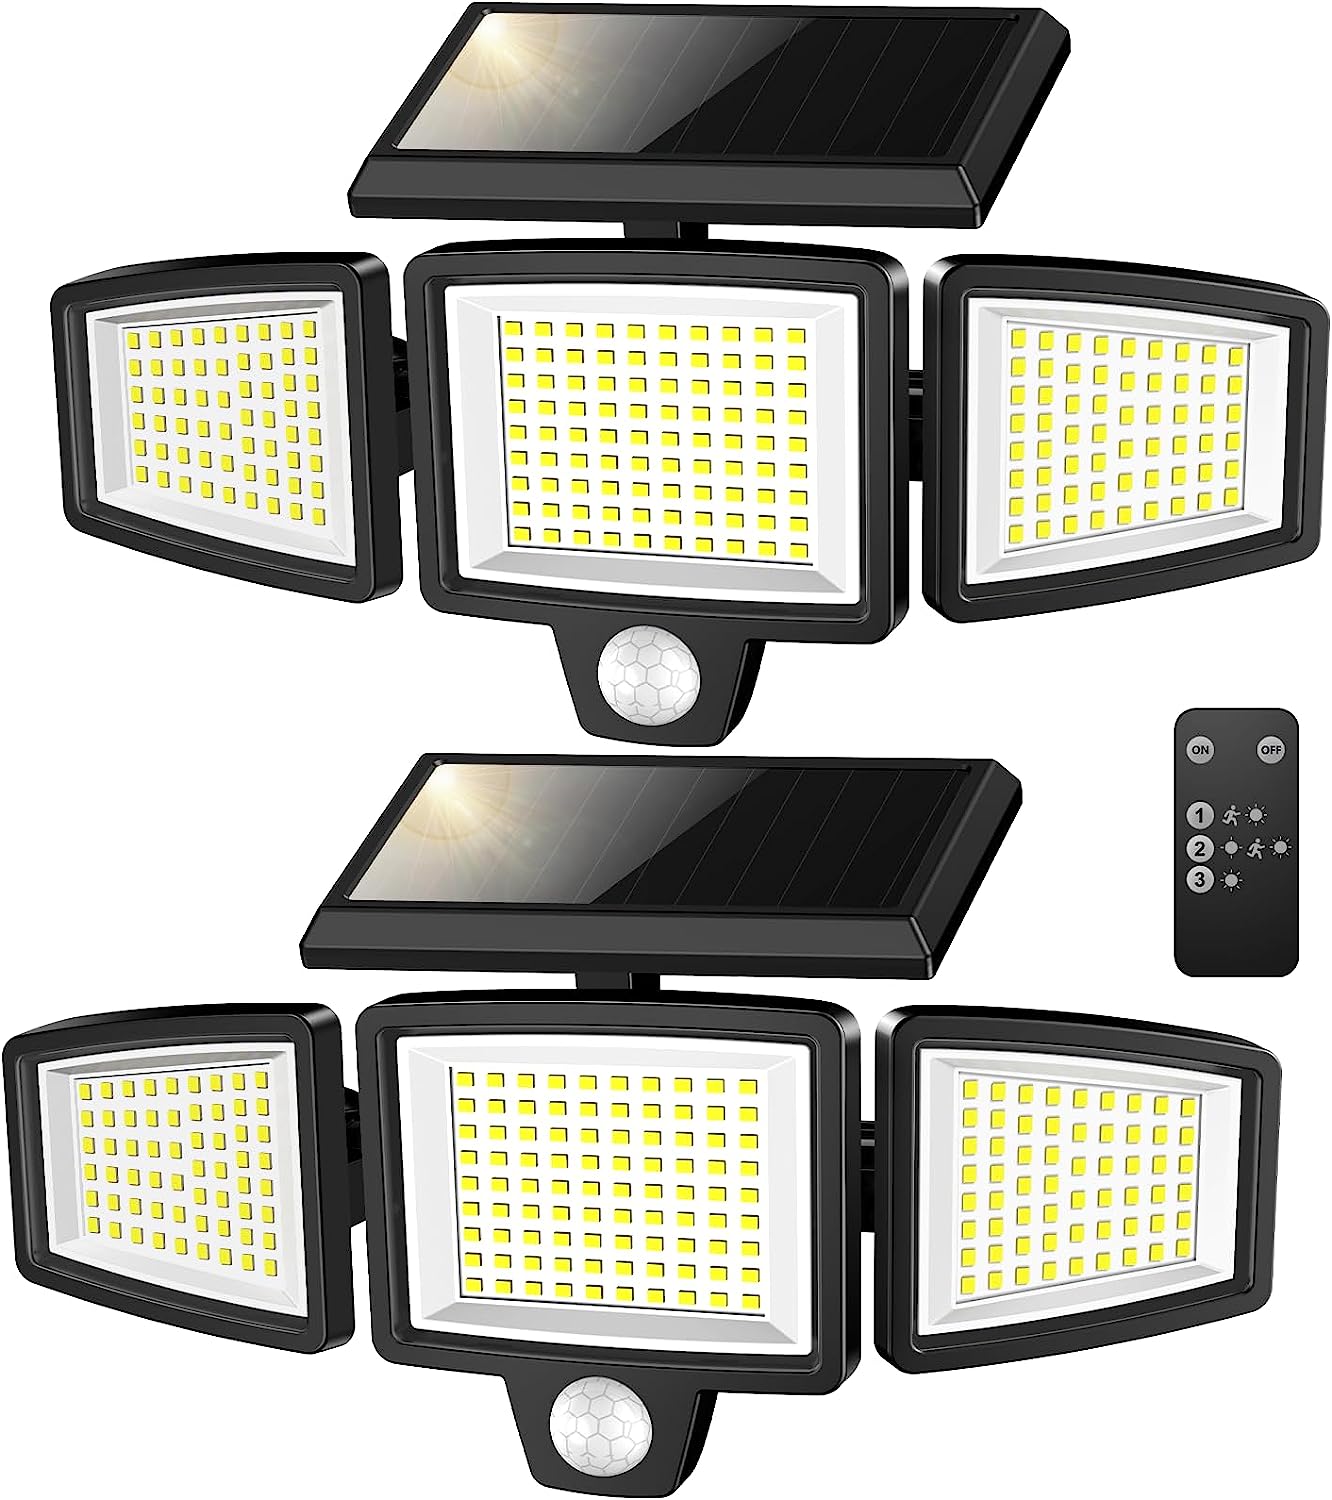 WWimy Solar Lights Outdoor, 210 LED 2500LM Motion [...]